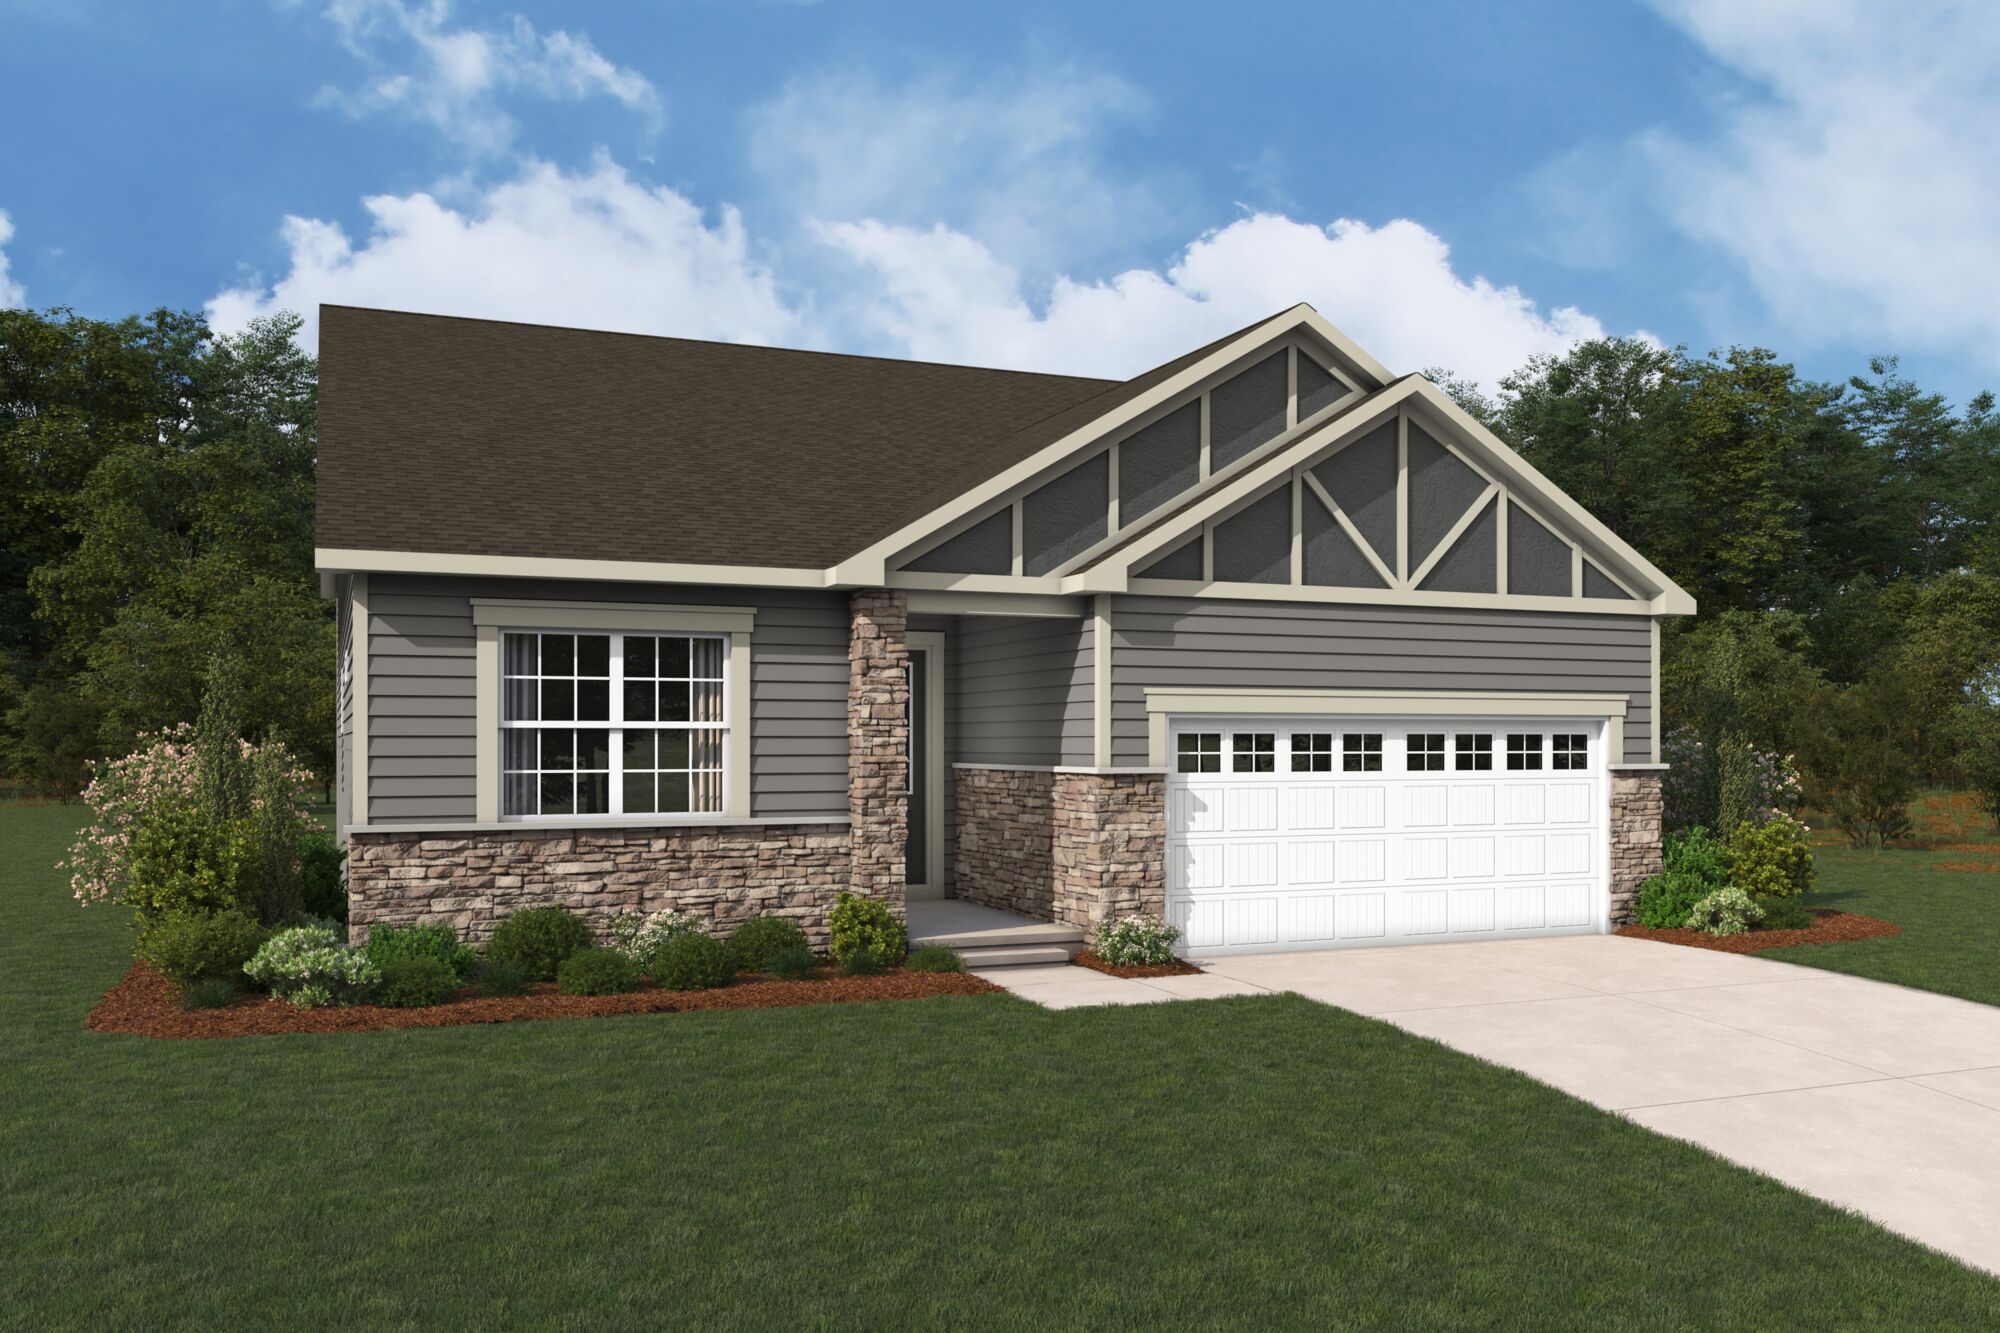  Elevation Front with garage, window and exterior stone